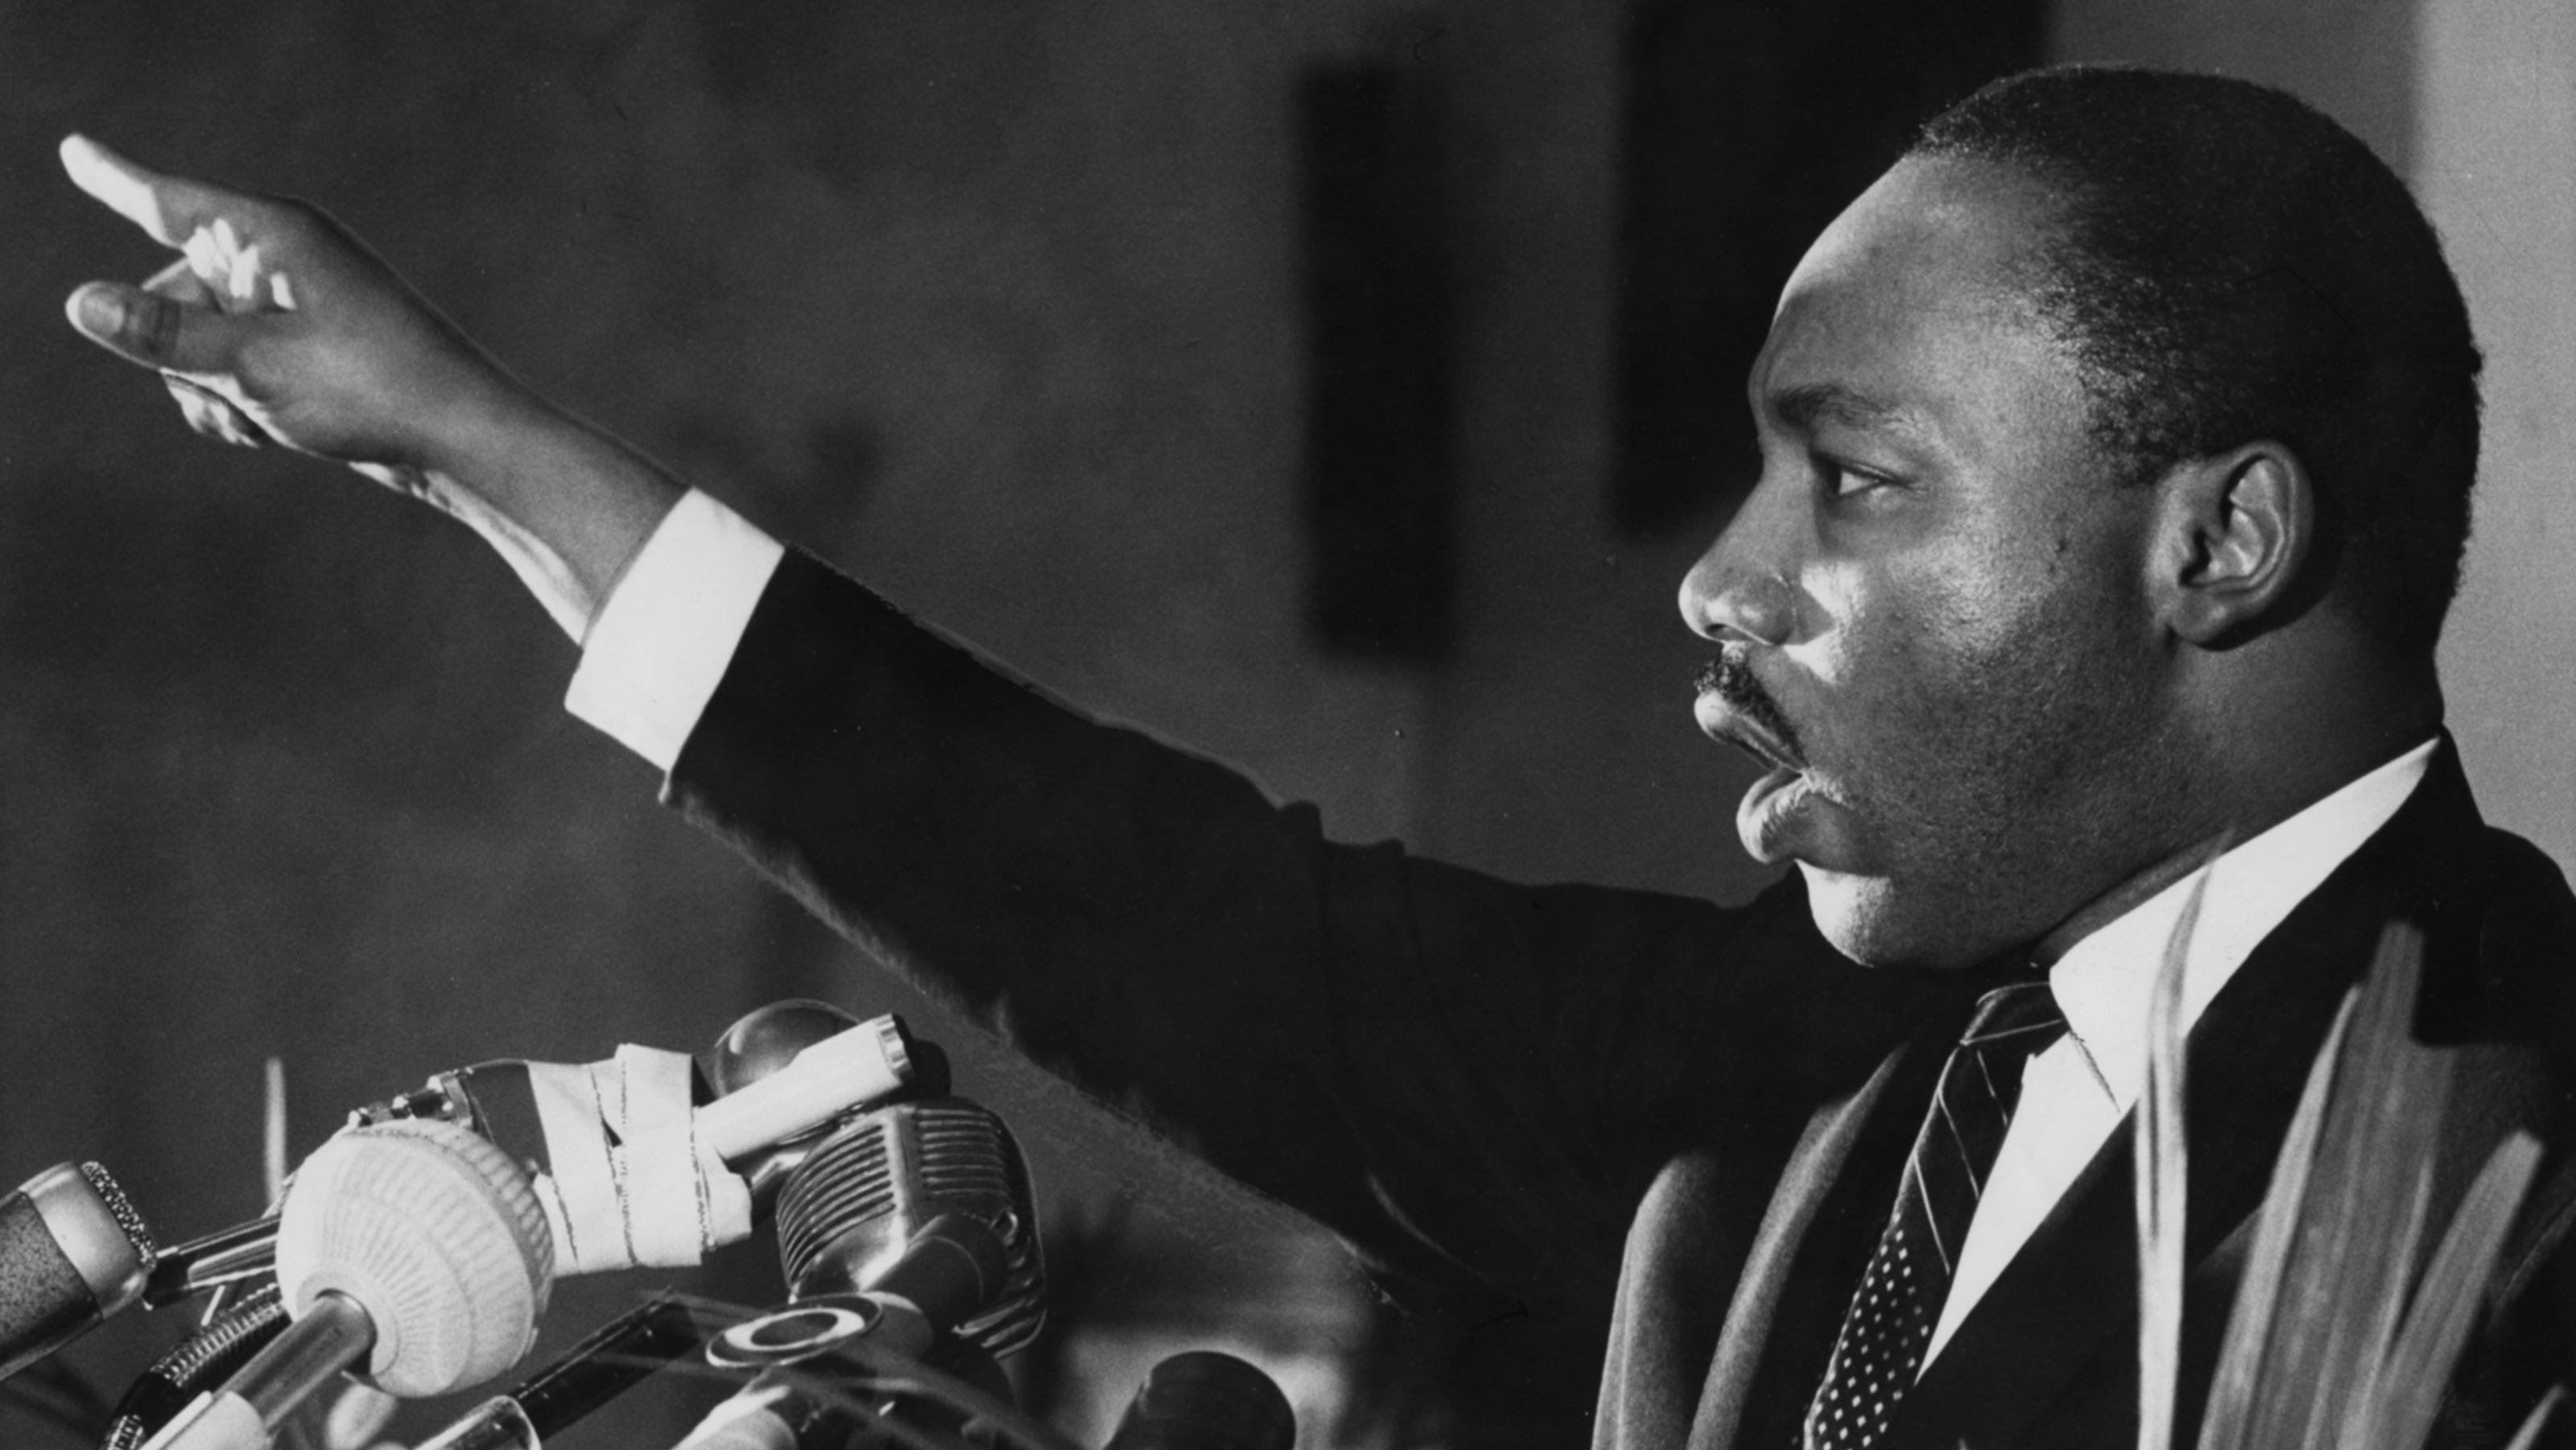 Martin Luther King Jr. Day 2021 How to celebrate, virtual events